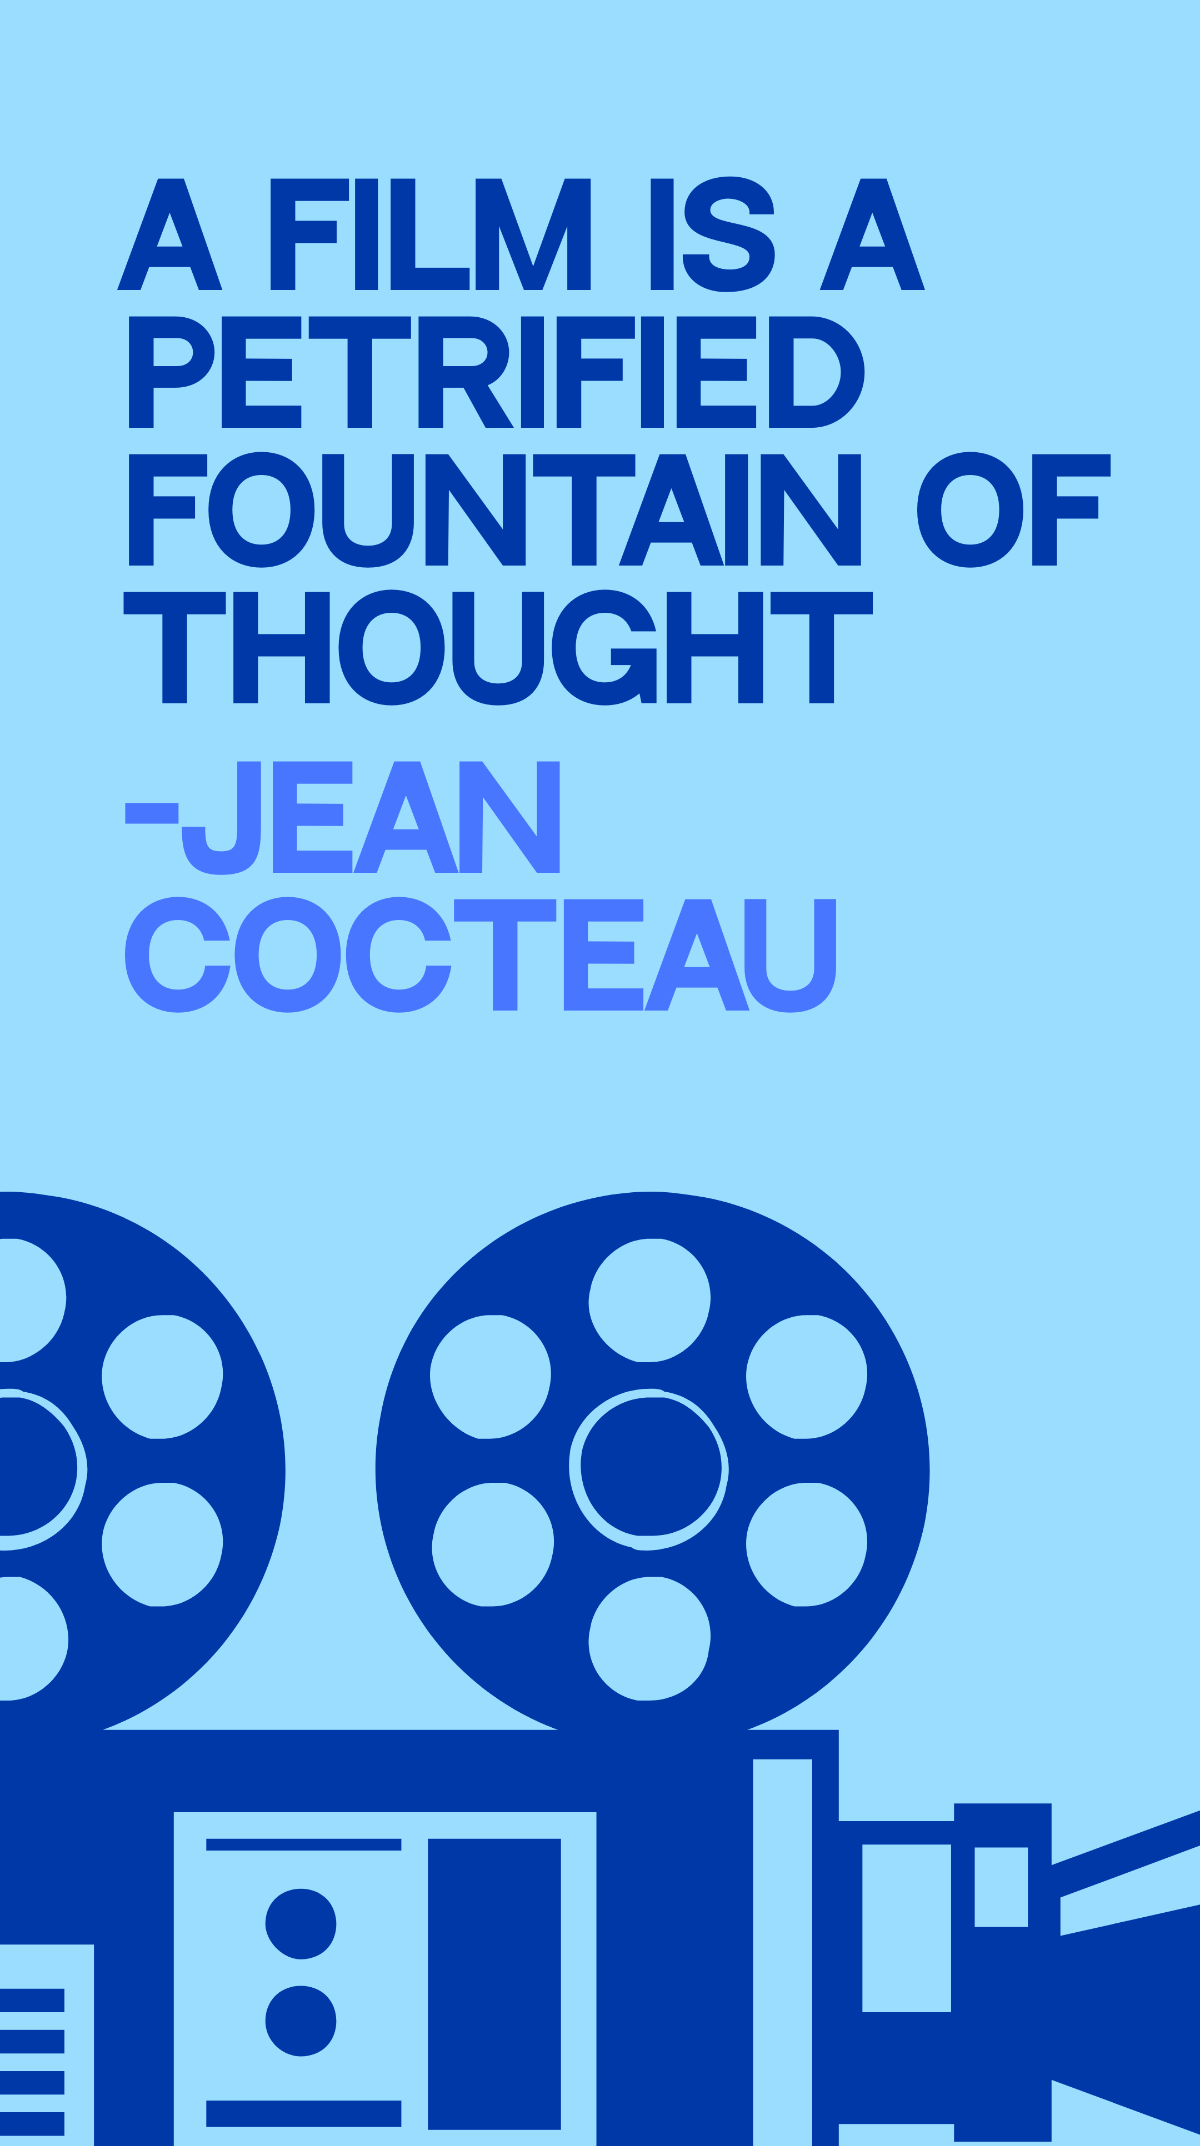 Free Jean Cocteau - A film is a petrified fountain of thought Template